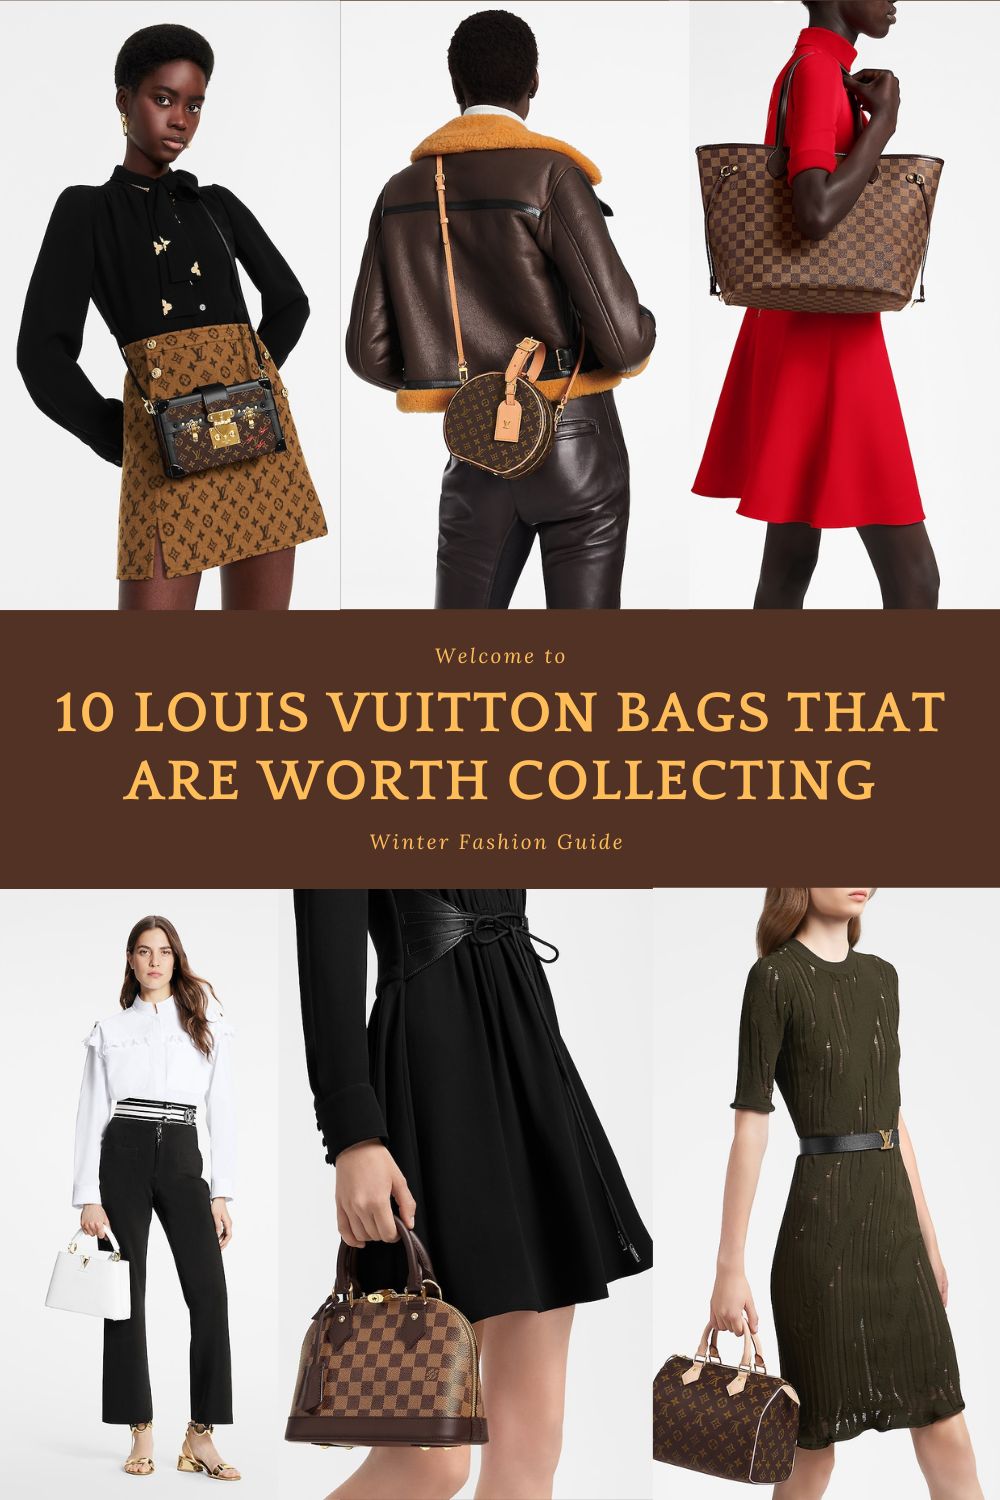 The 10 Louis Vuitton Bags That Are Worth Collecting